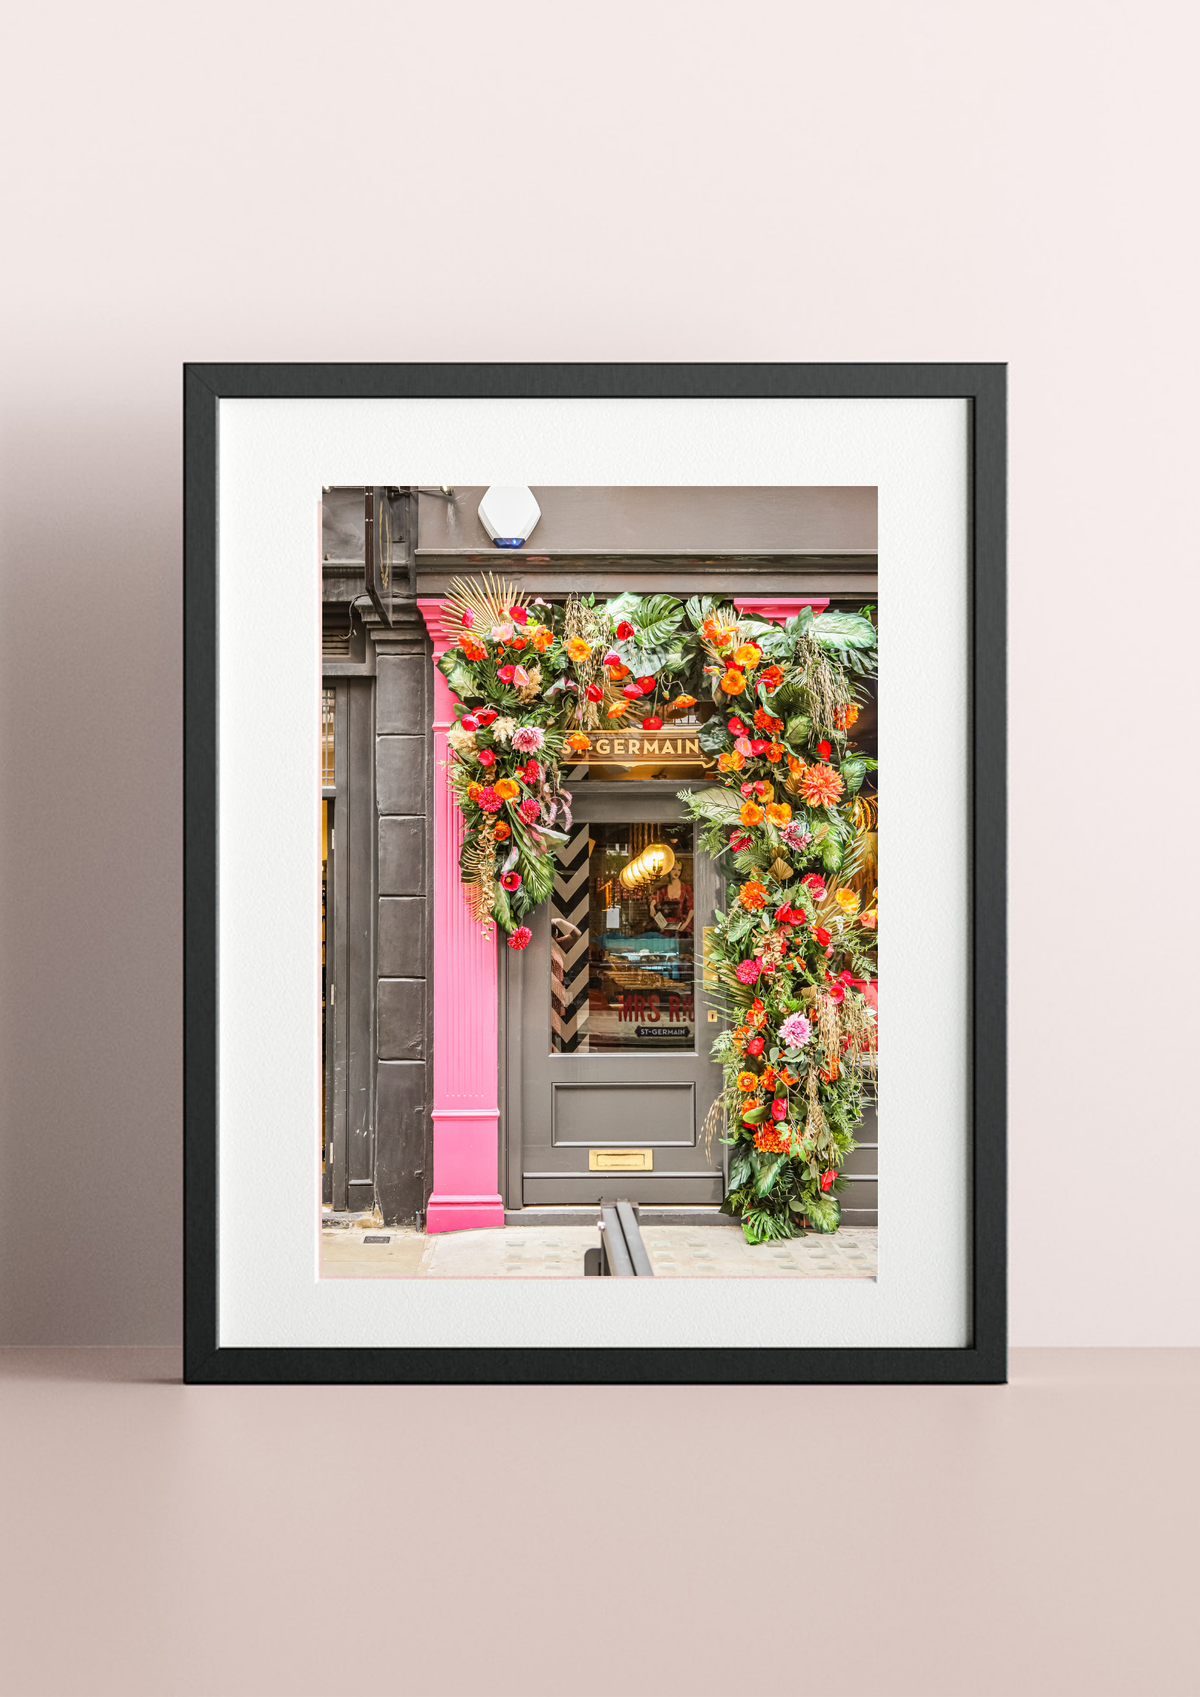 Colour My World - St Germain, Framed and Mounted Photographic Art Print